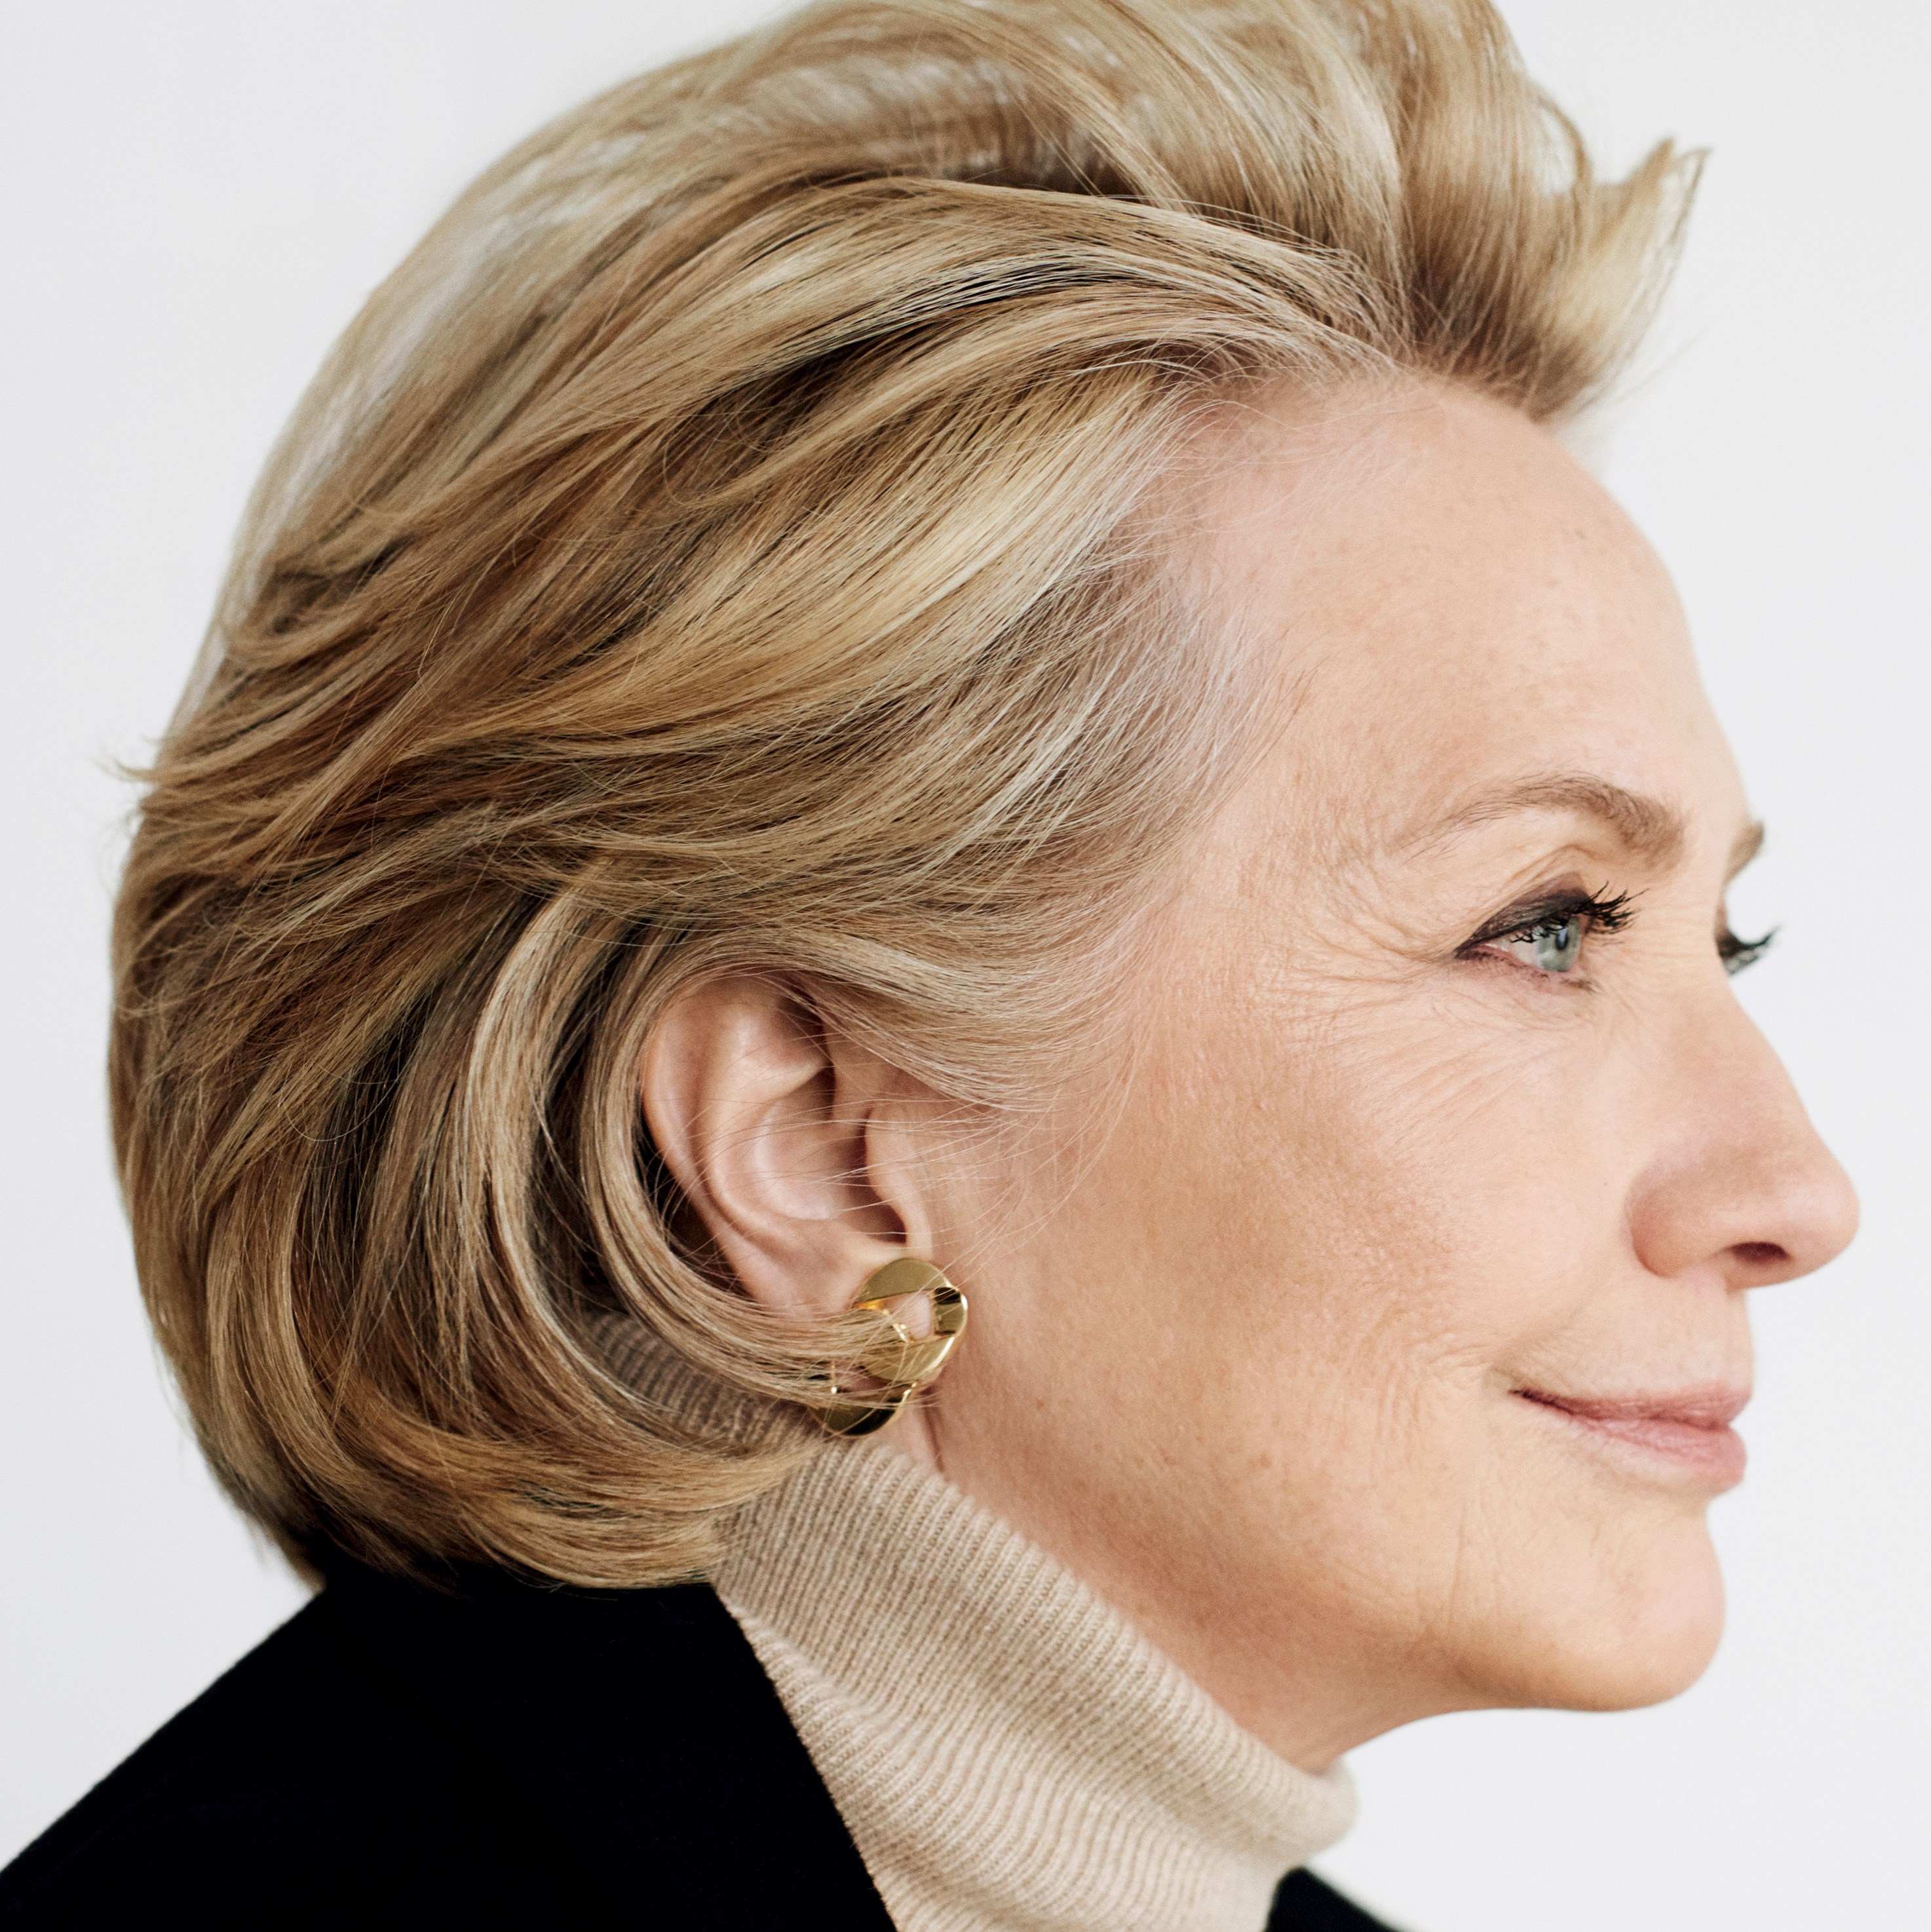 hillary clinton hair changes, hairstyles. really?